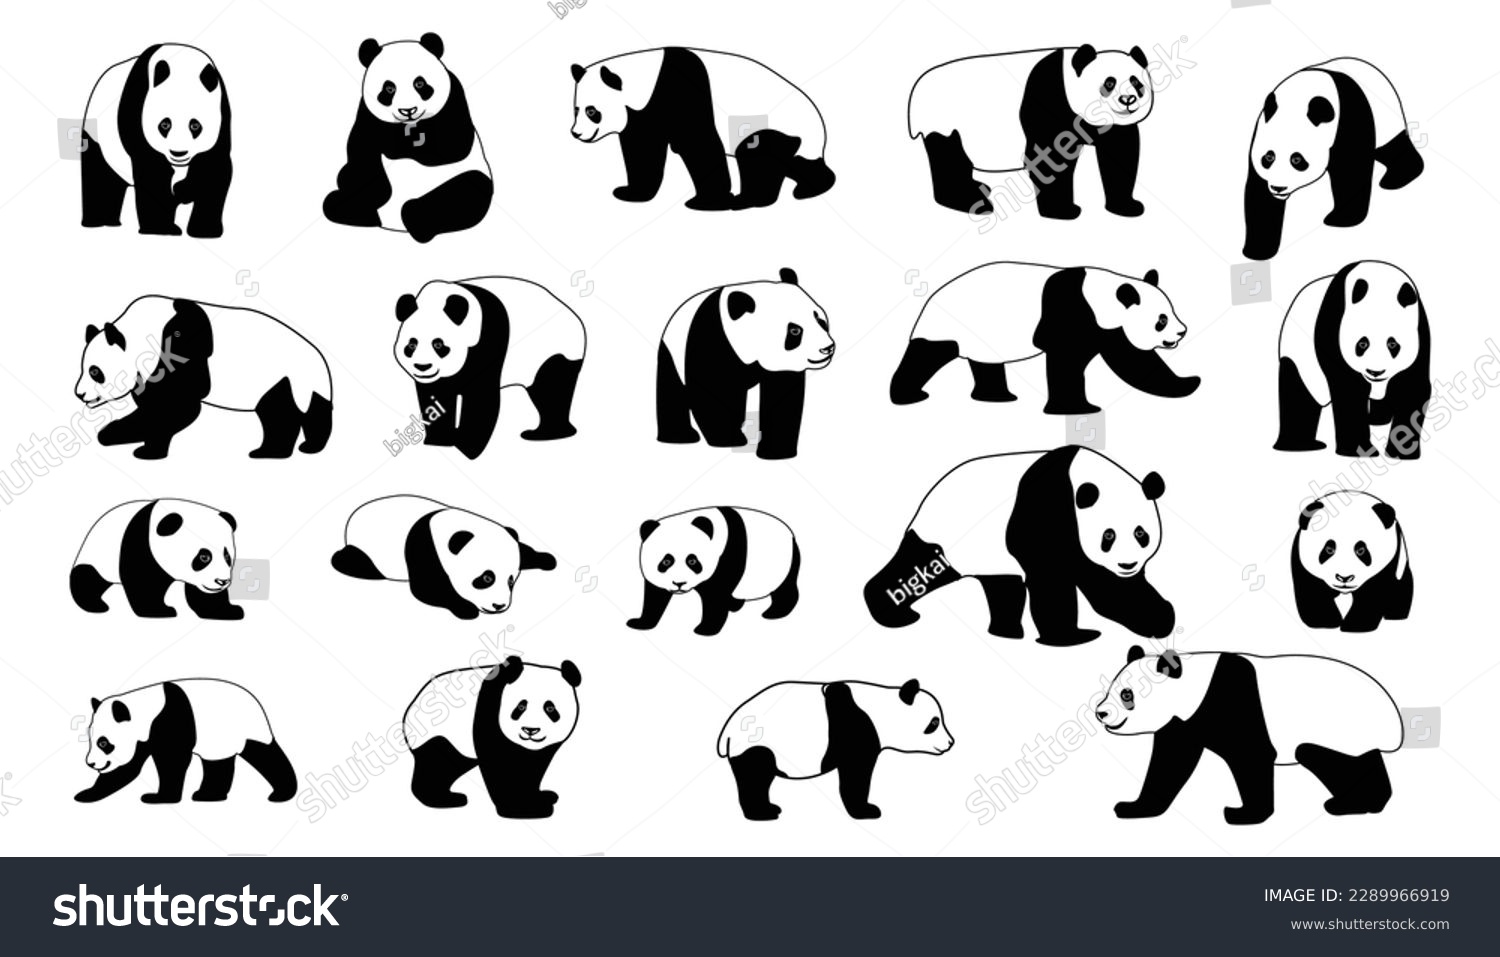 SVG of cute panda Vector illustration isolated on colorful Set of cute big pandas in different poses. flat vector illustration design svg